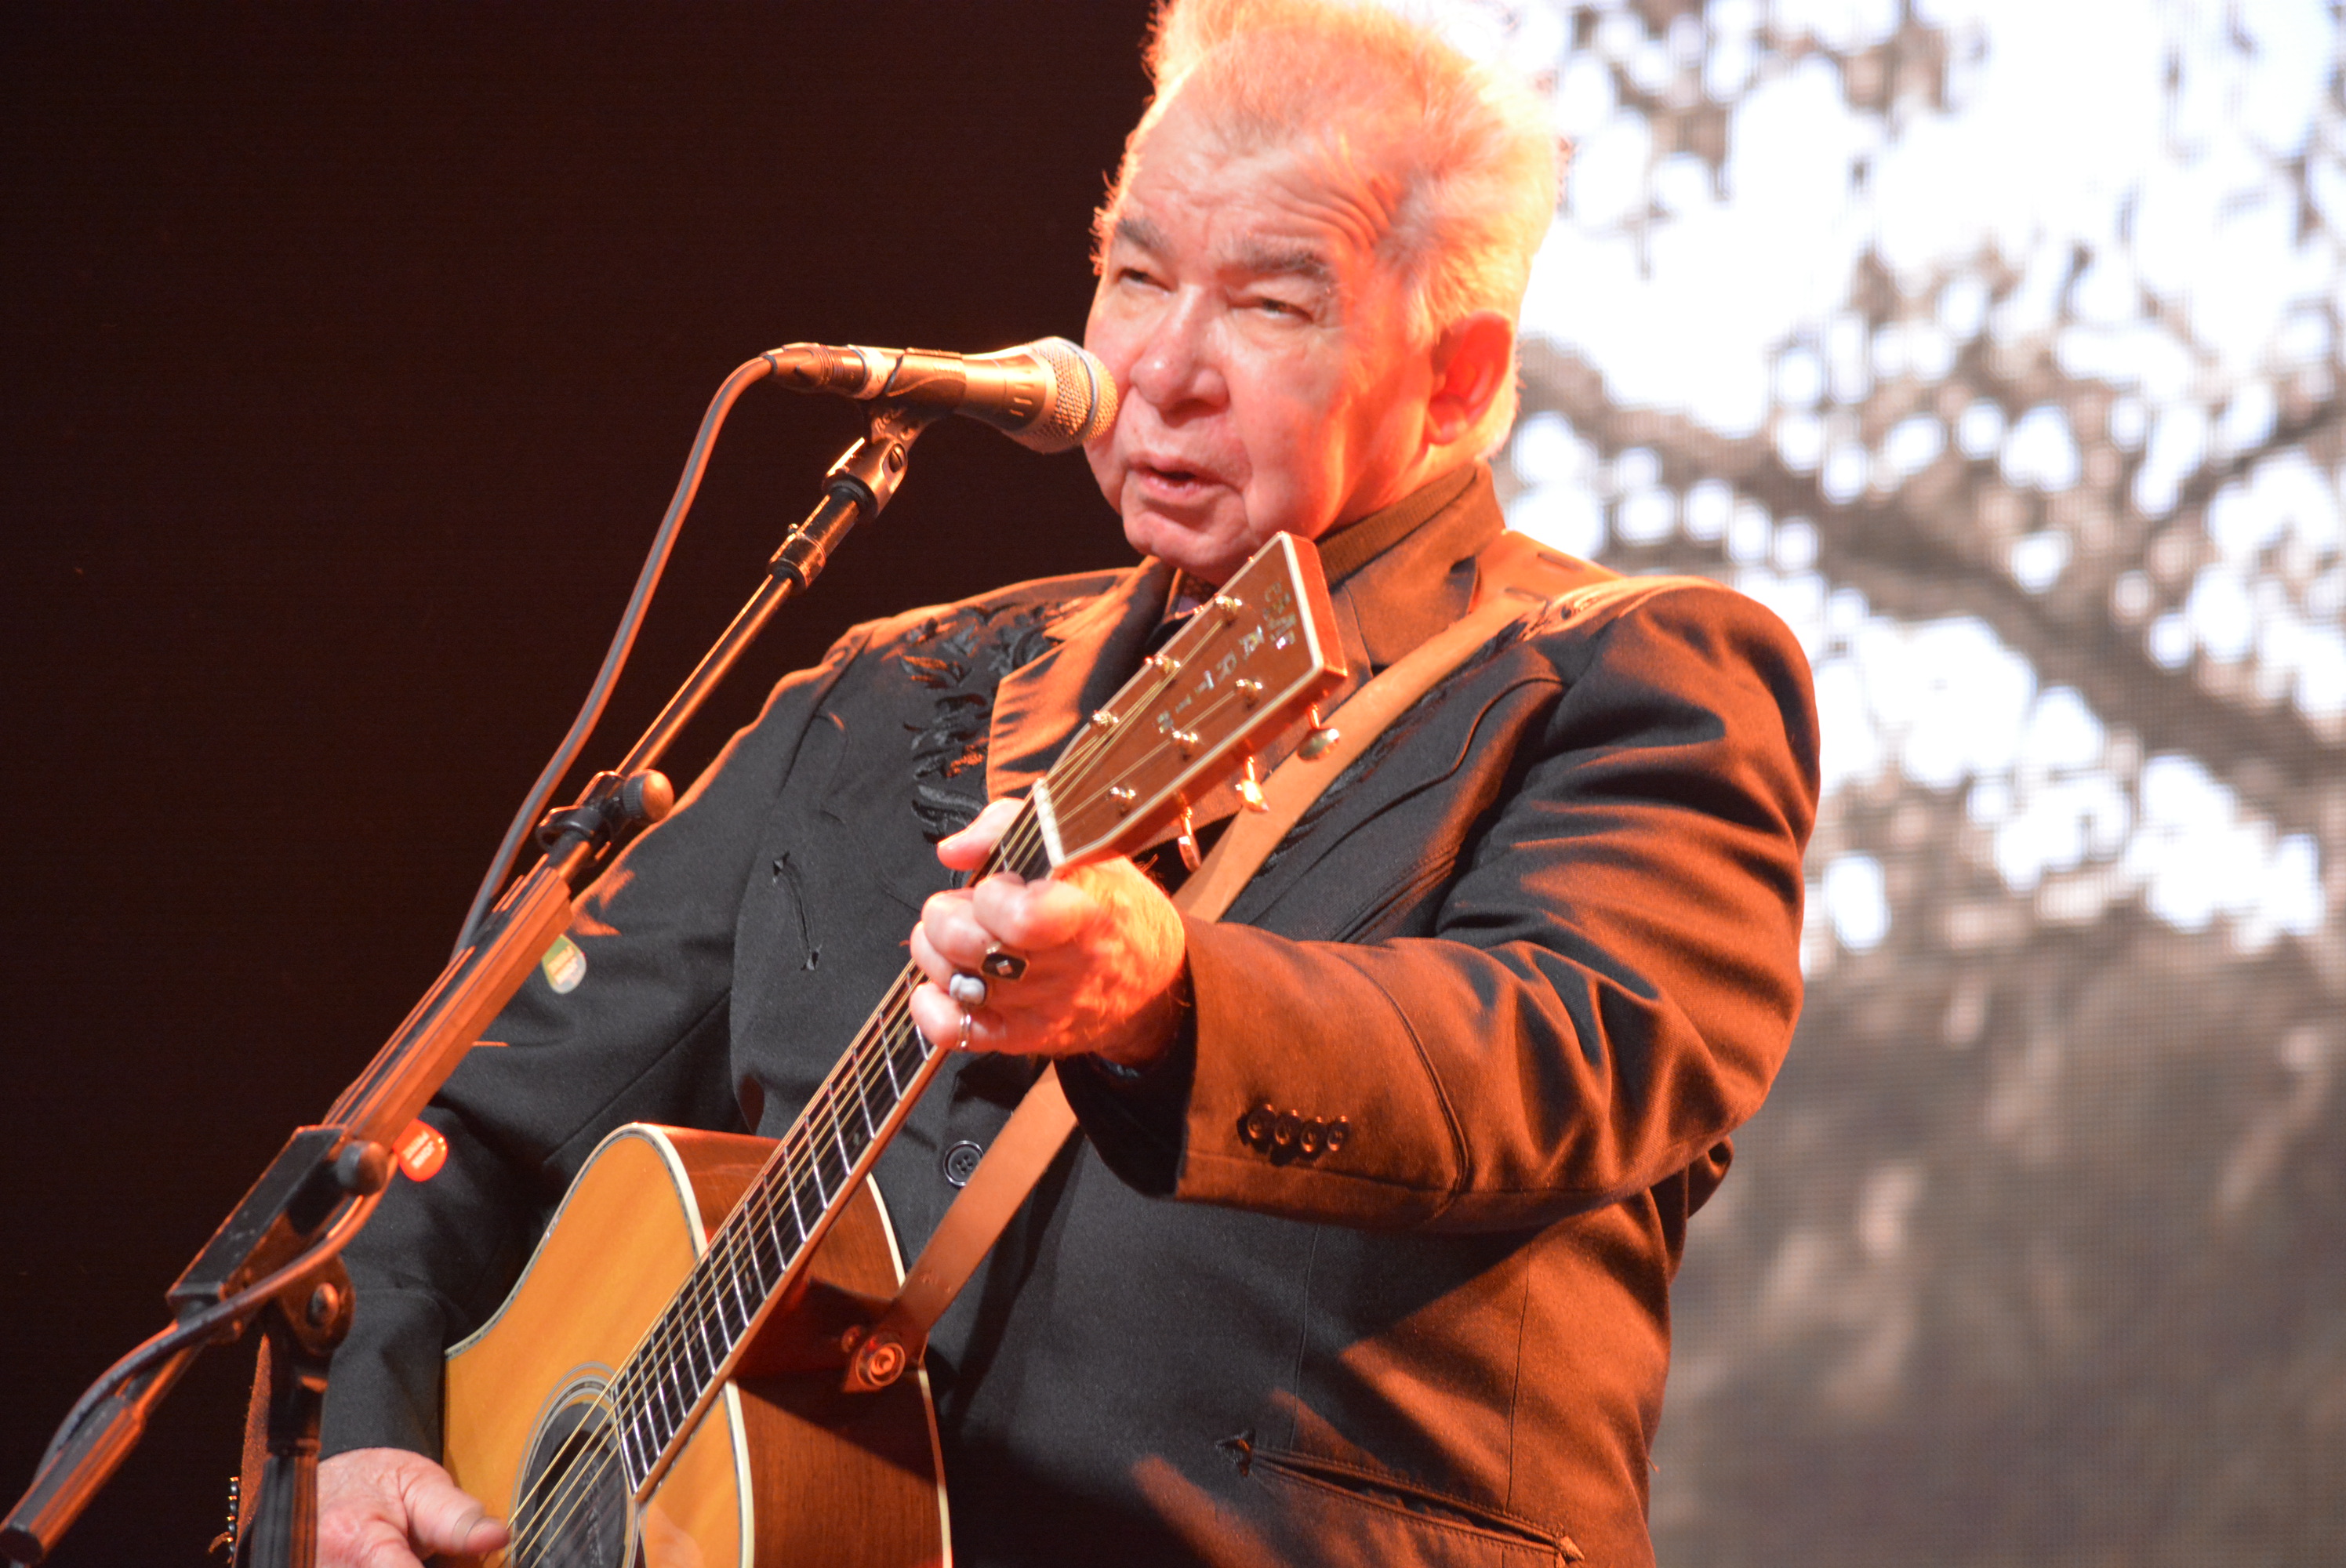 When I Get To Heaven A Candid Conversation With John Prine